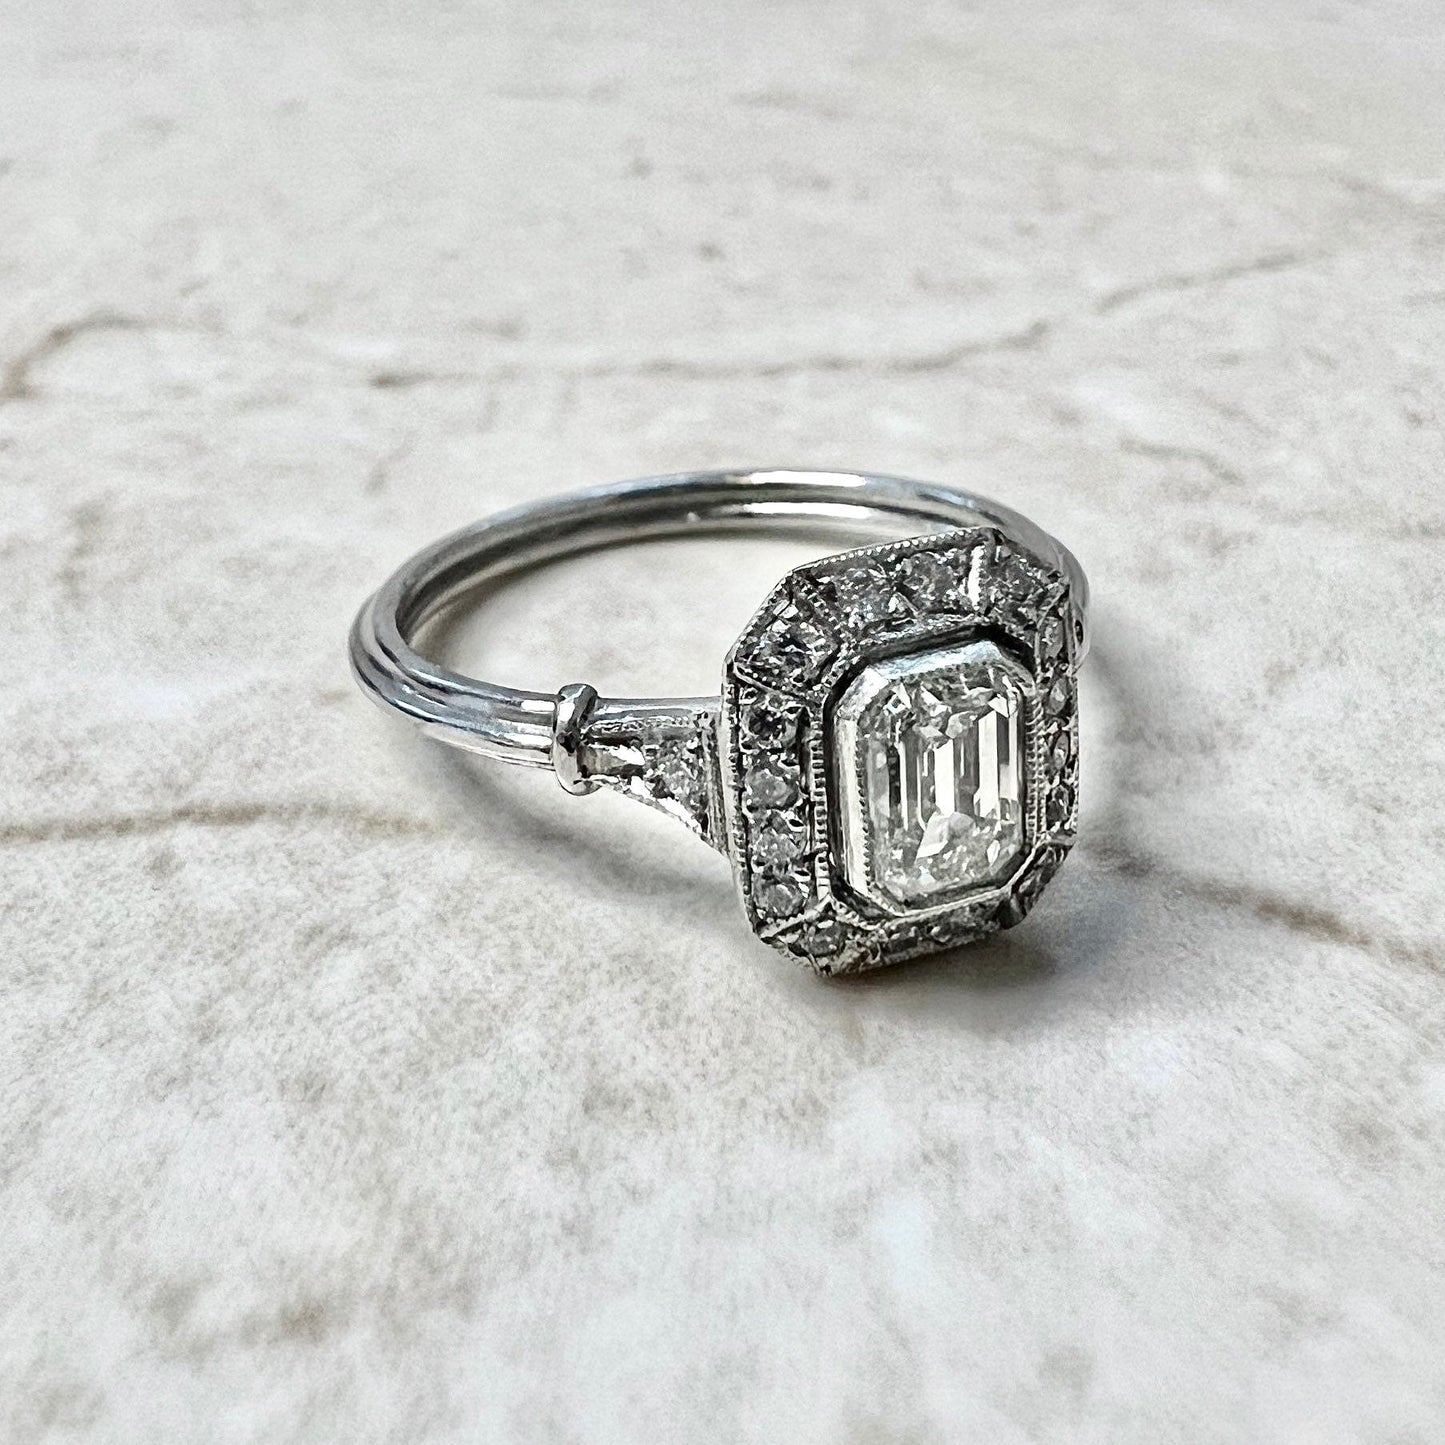 Handcrafted Platinum Art Deco Style Diamond Halo Ring 0.78 CT- Emerald Cut Diamond Halo Engagement Ring - Promise Ring - Vintage Style Ring